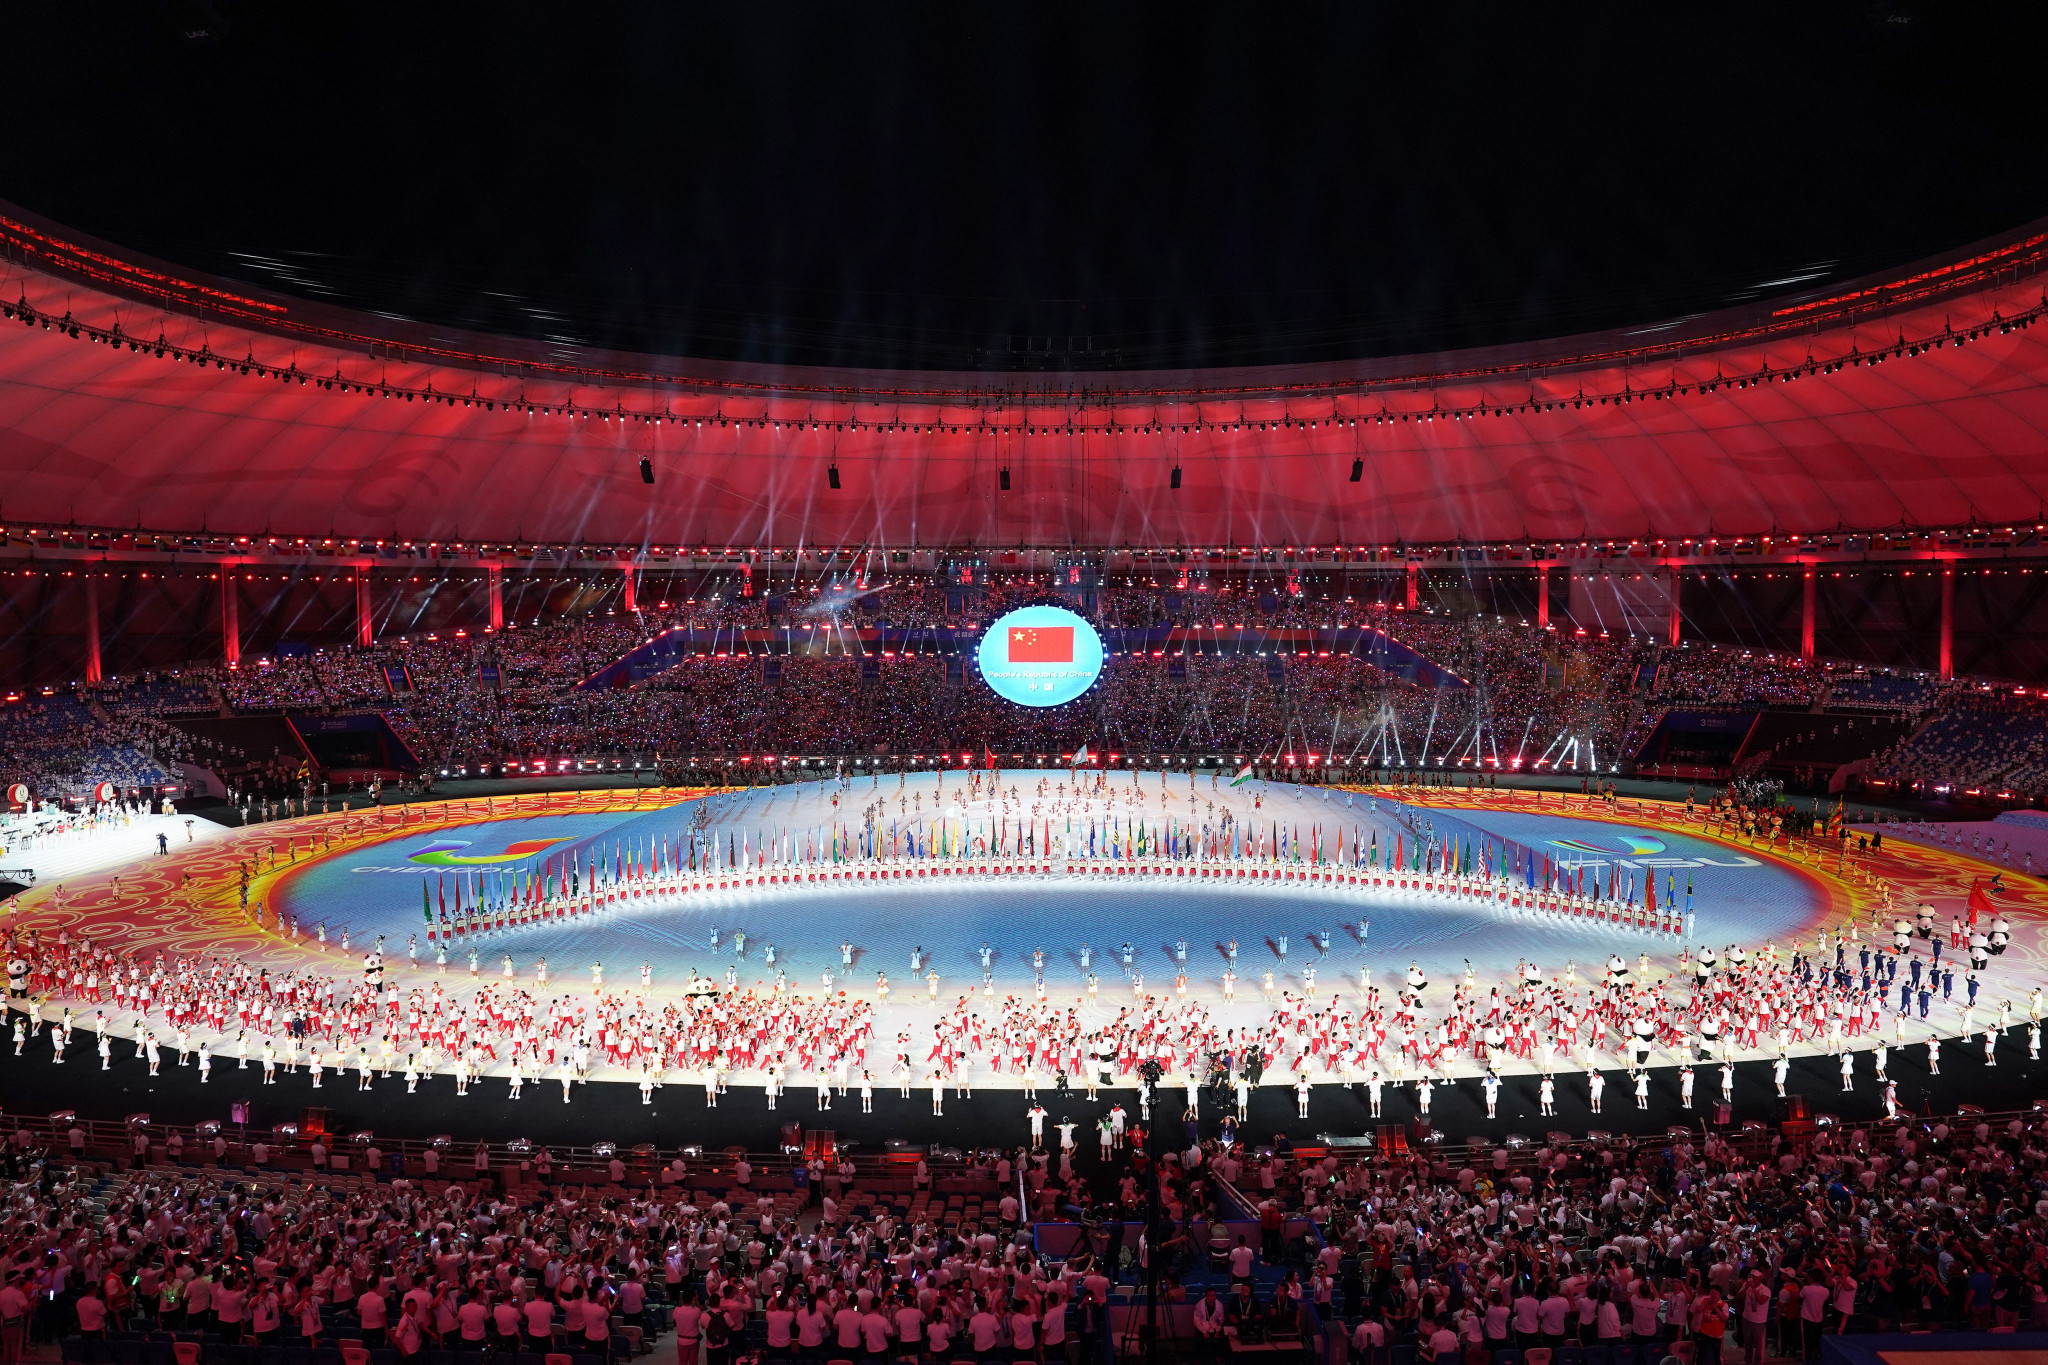 Chengdu will play host to the 2025 World Games, with the venues and dates confirmed. GETTY IMAGES